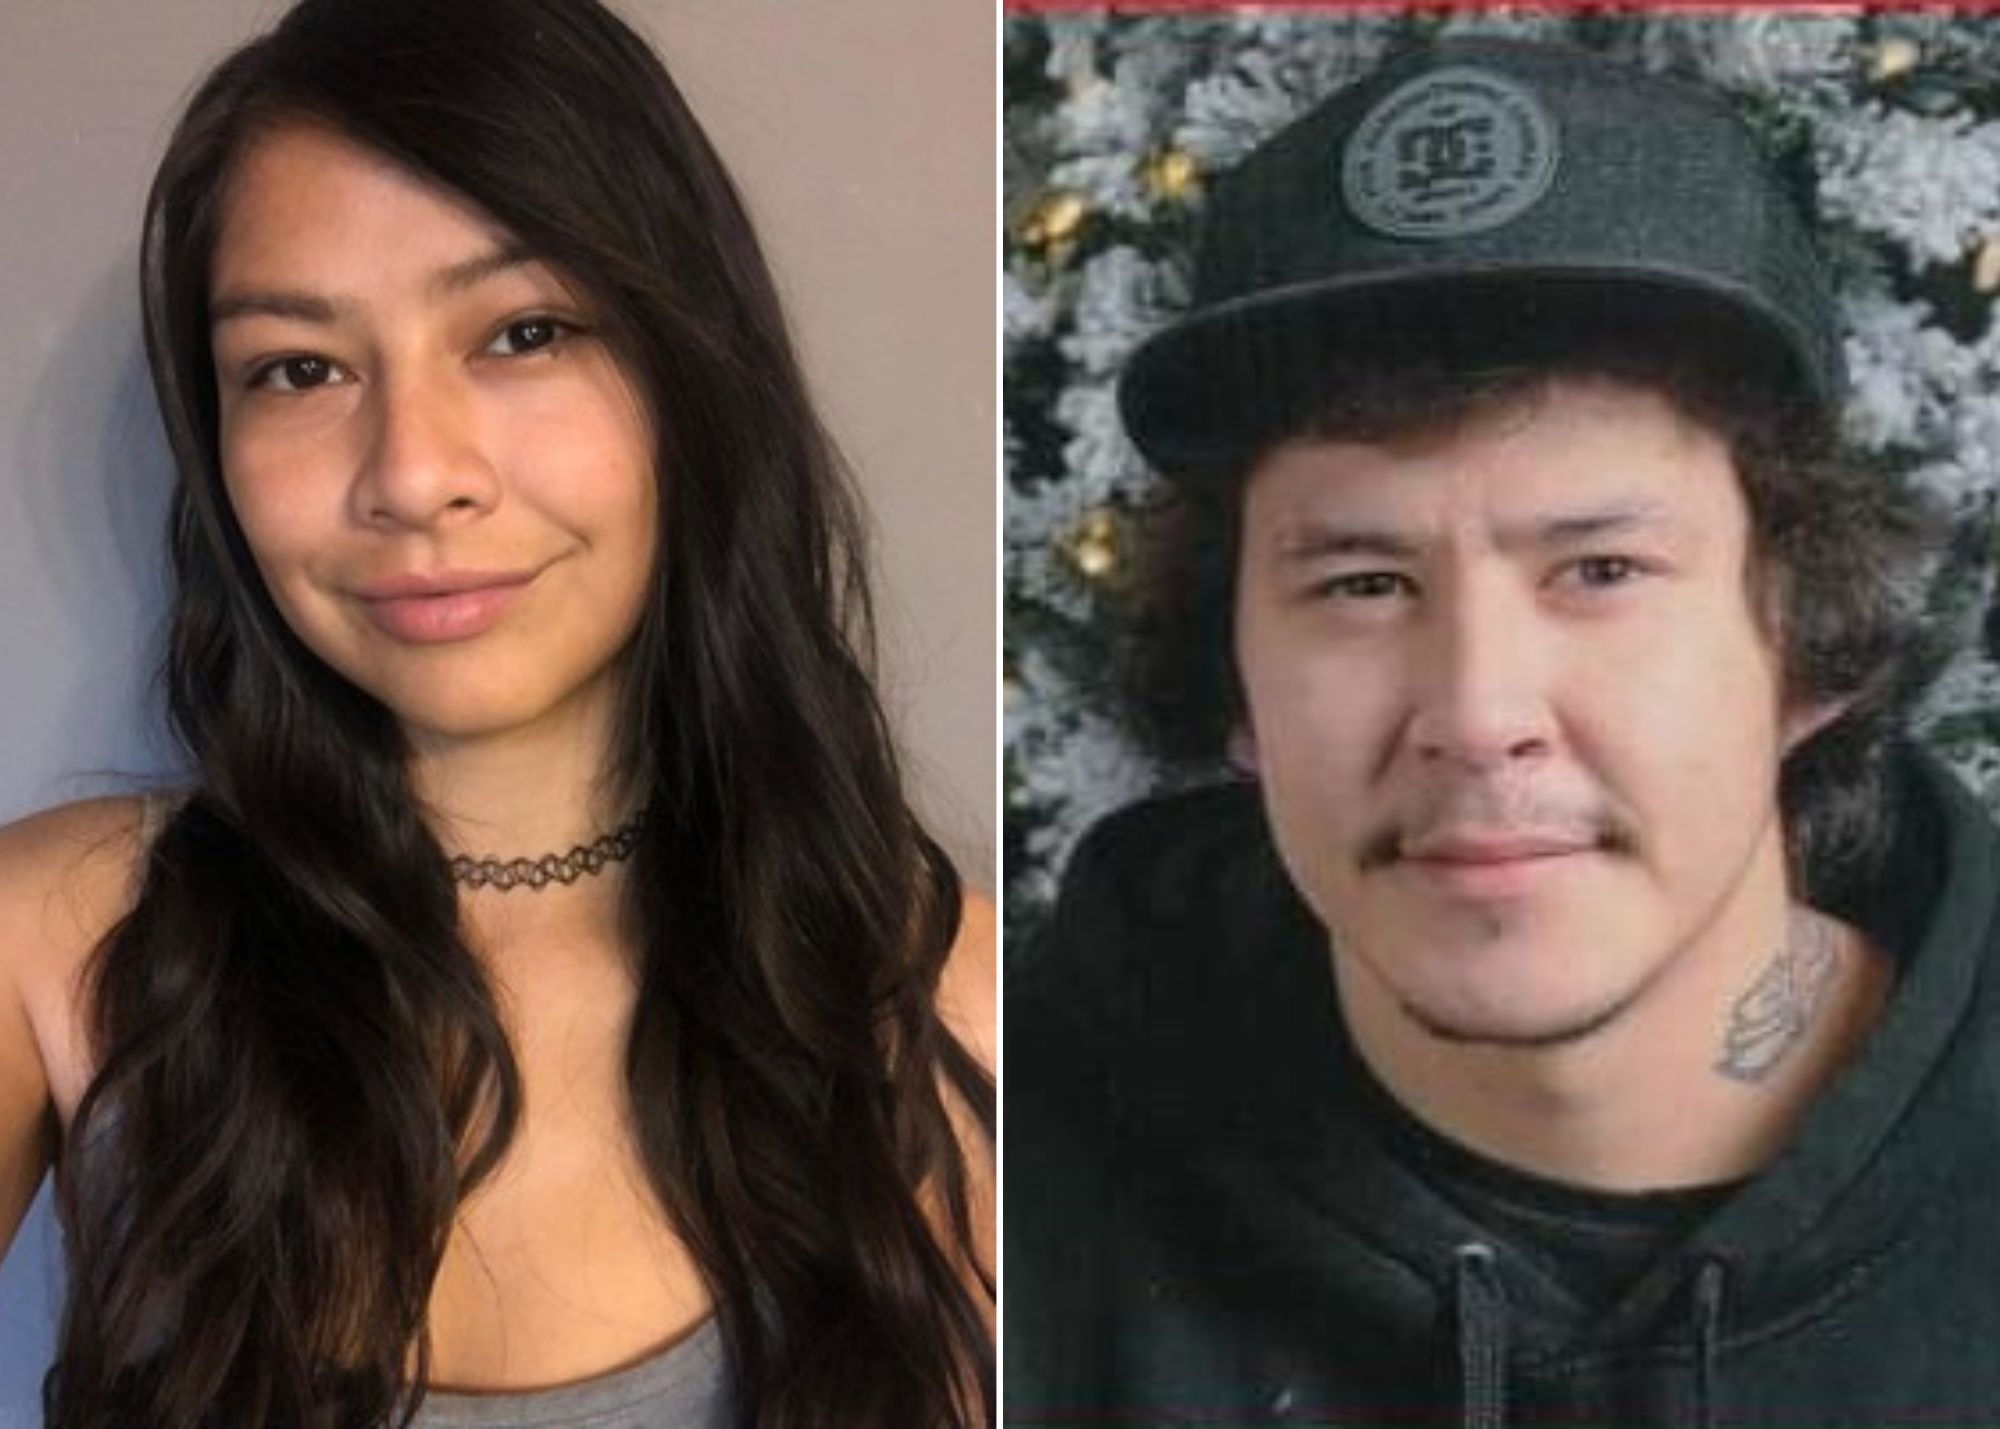 ‘She loves her family’: Saik’uz First Nation calls for support in search for missing members